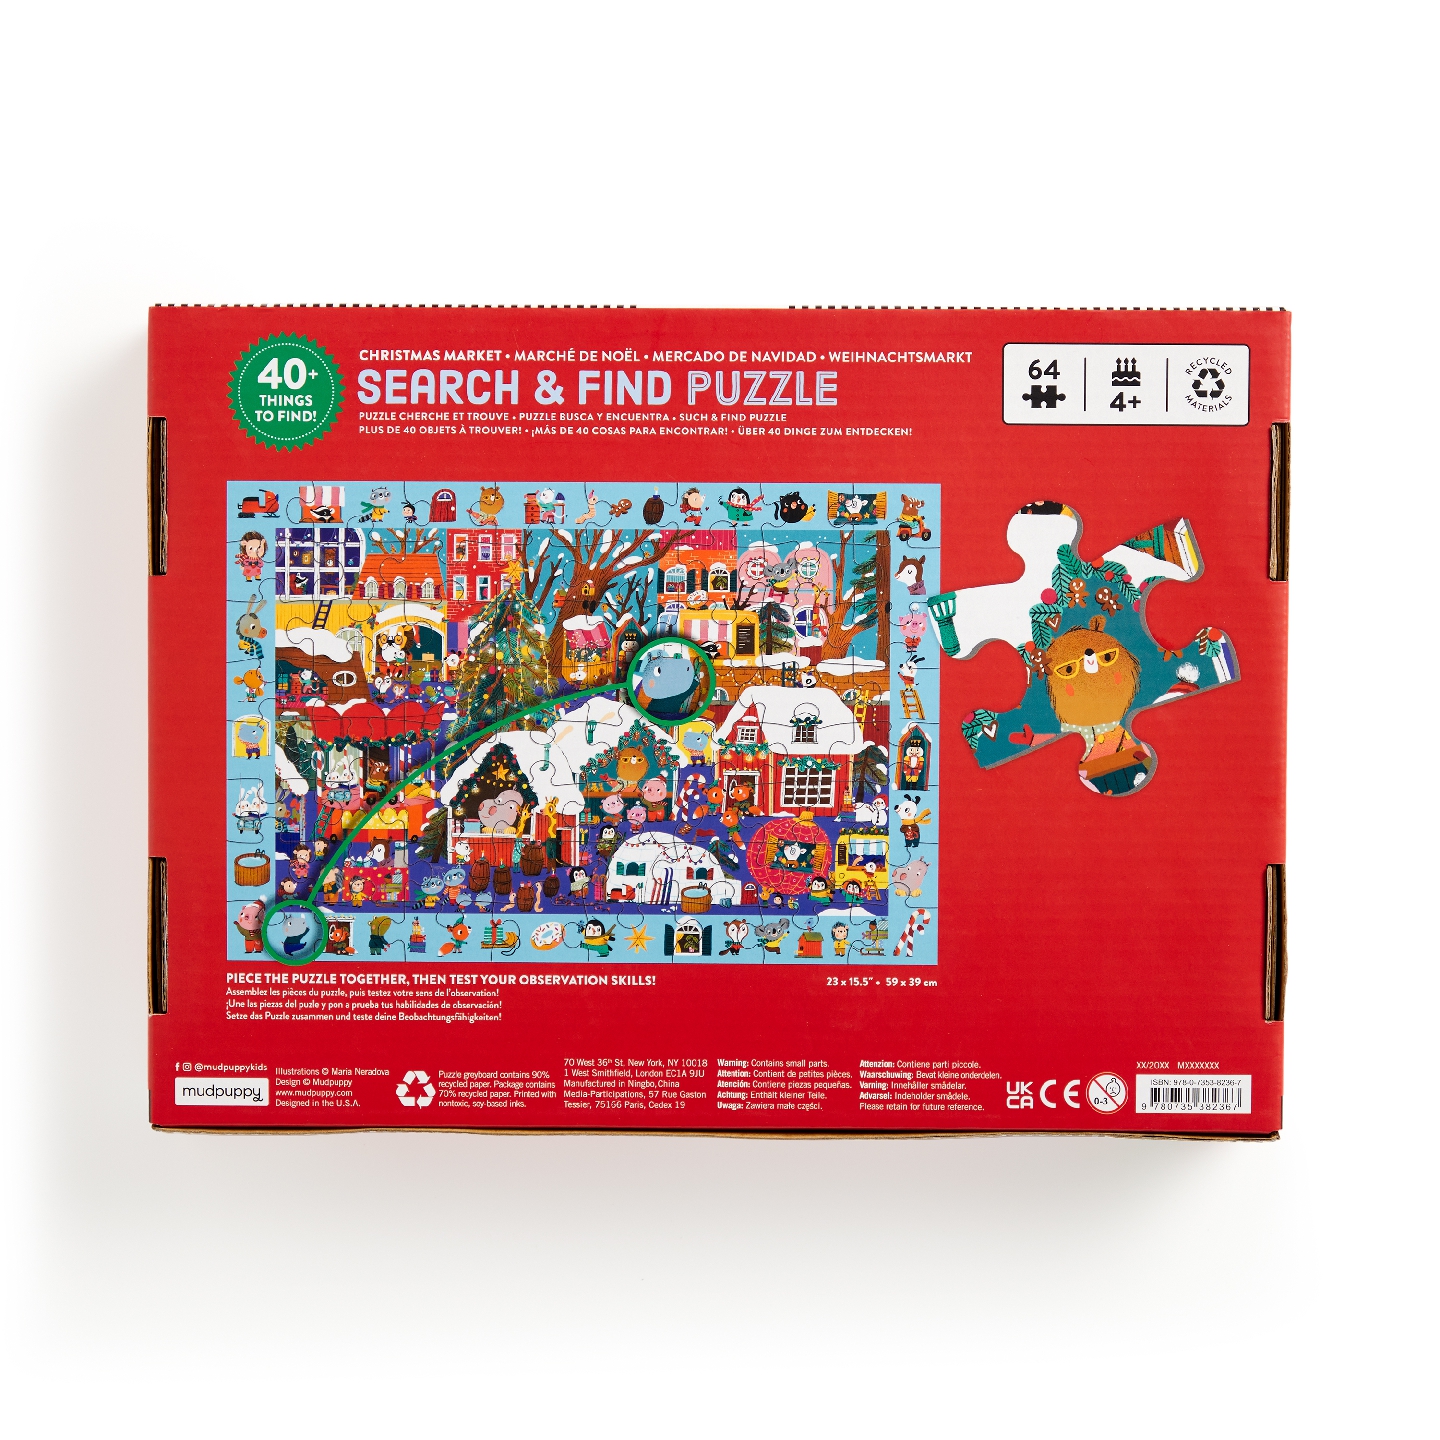 Christmas Market 64 Piece Search & Find Puzzle